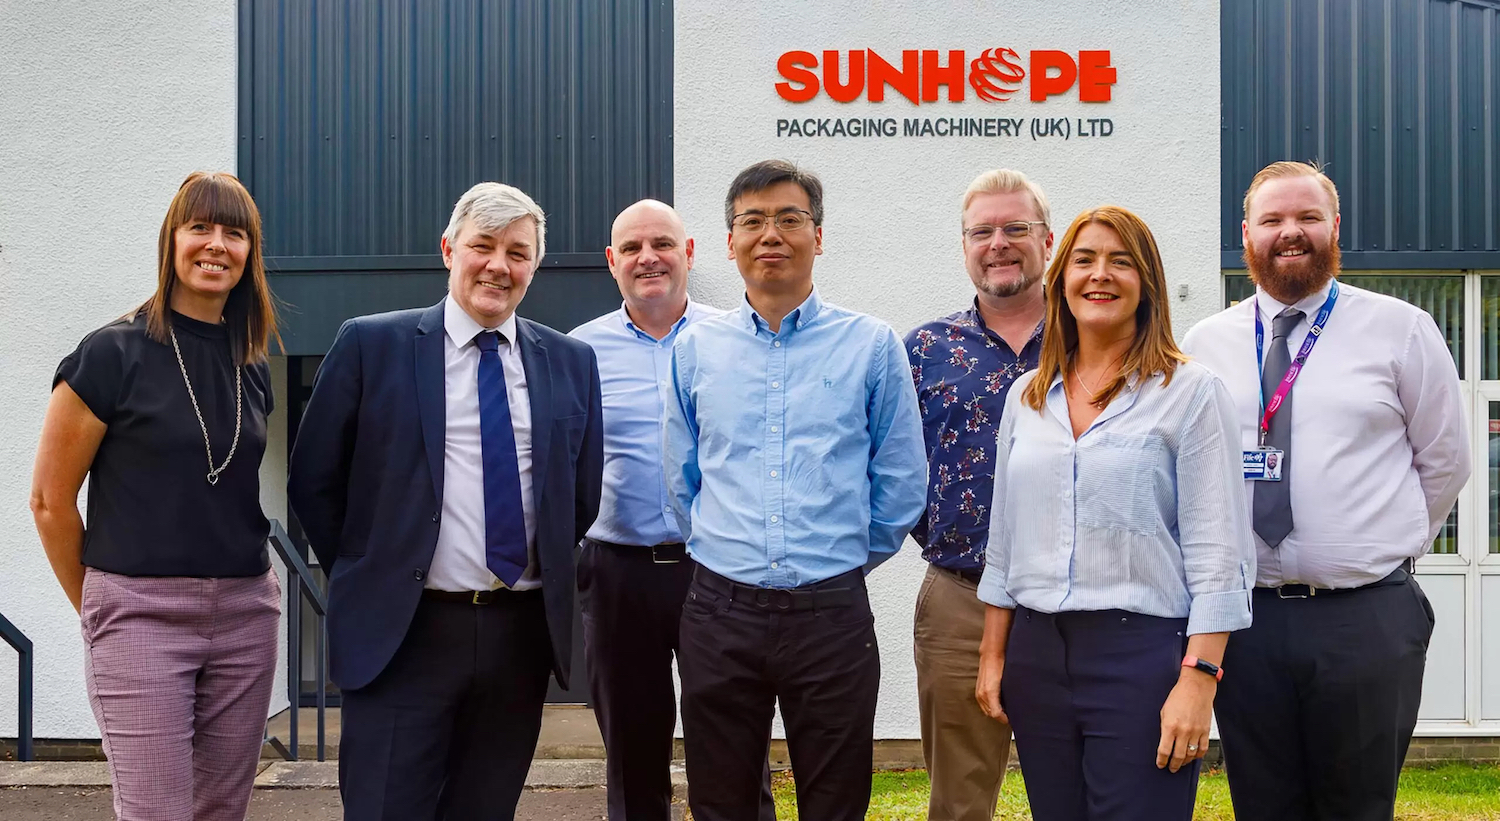 Chinese packaging firm chooses Scotland for European packaging hub